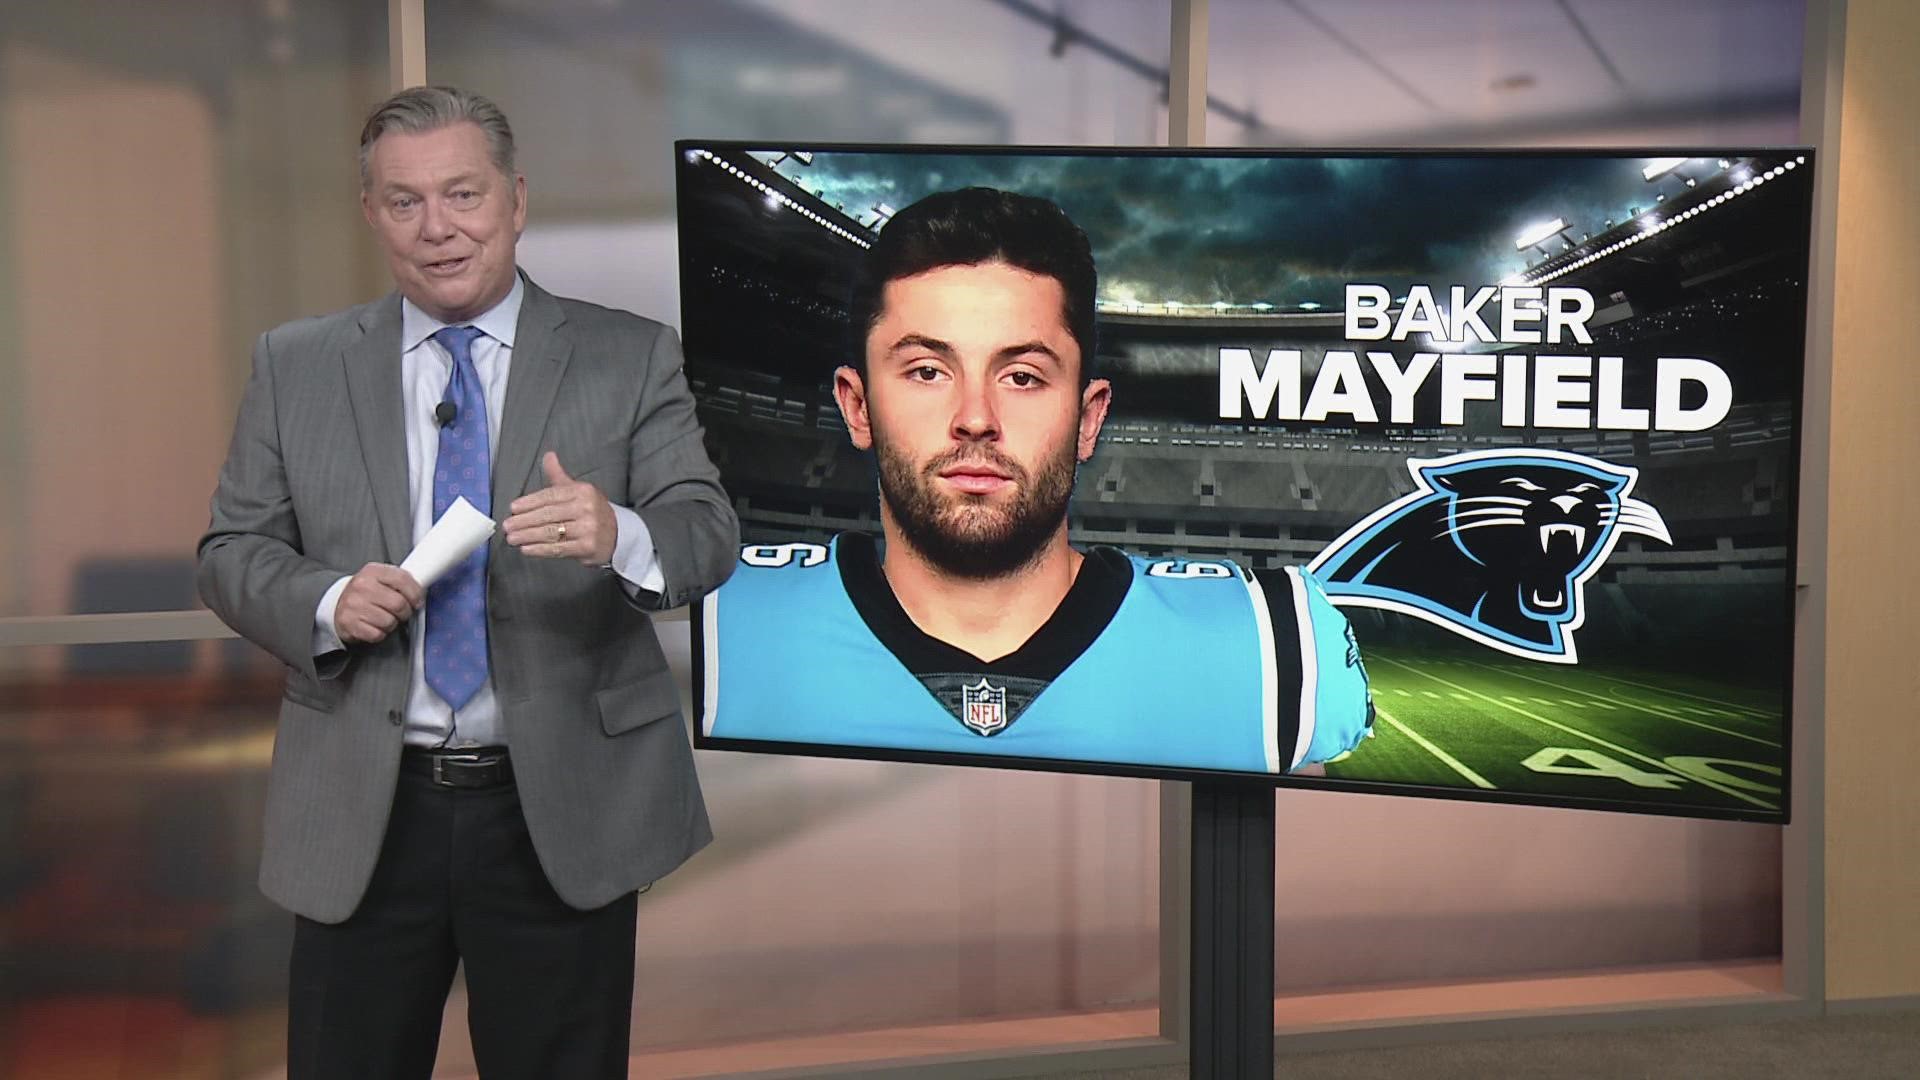 Last week, the Cleveland Browns traded Baker Mayfield to the Carolina Panthers, completing a breakup with their now-former quarterback that was months in the making.